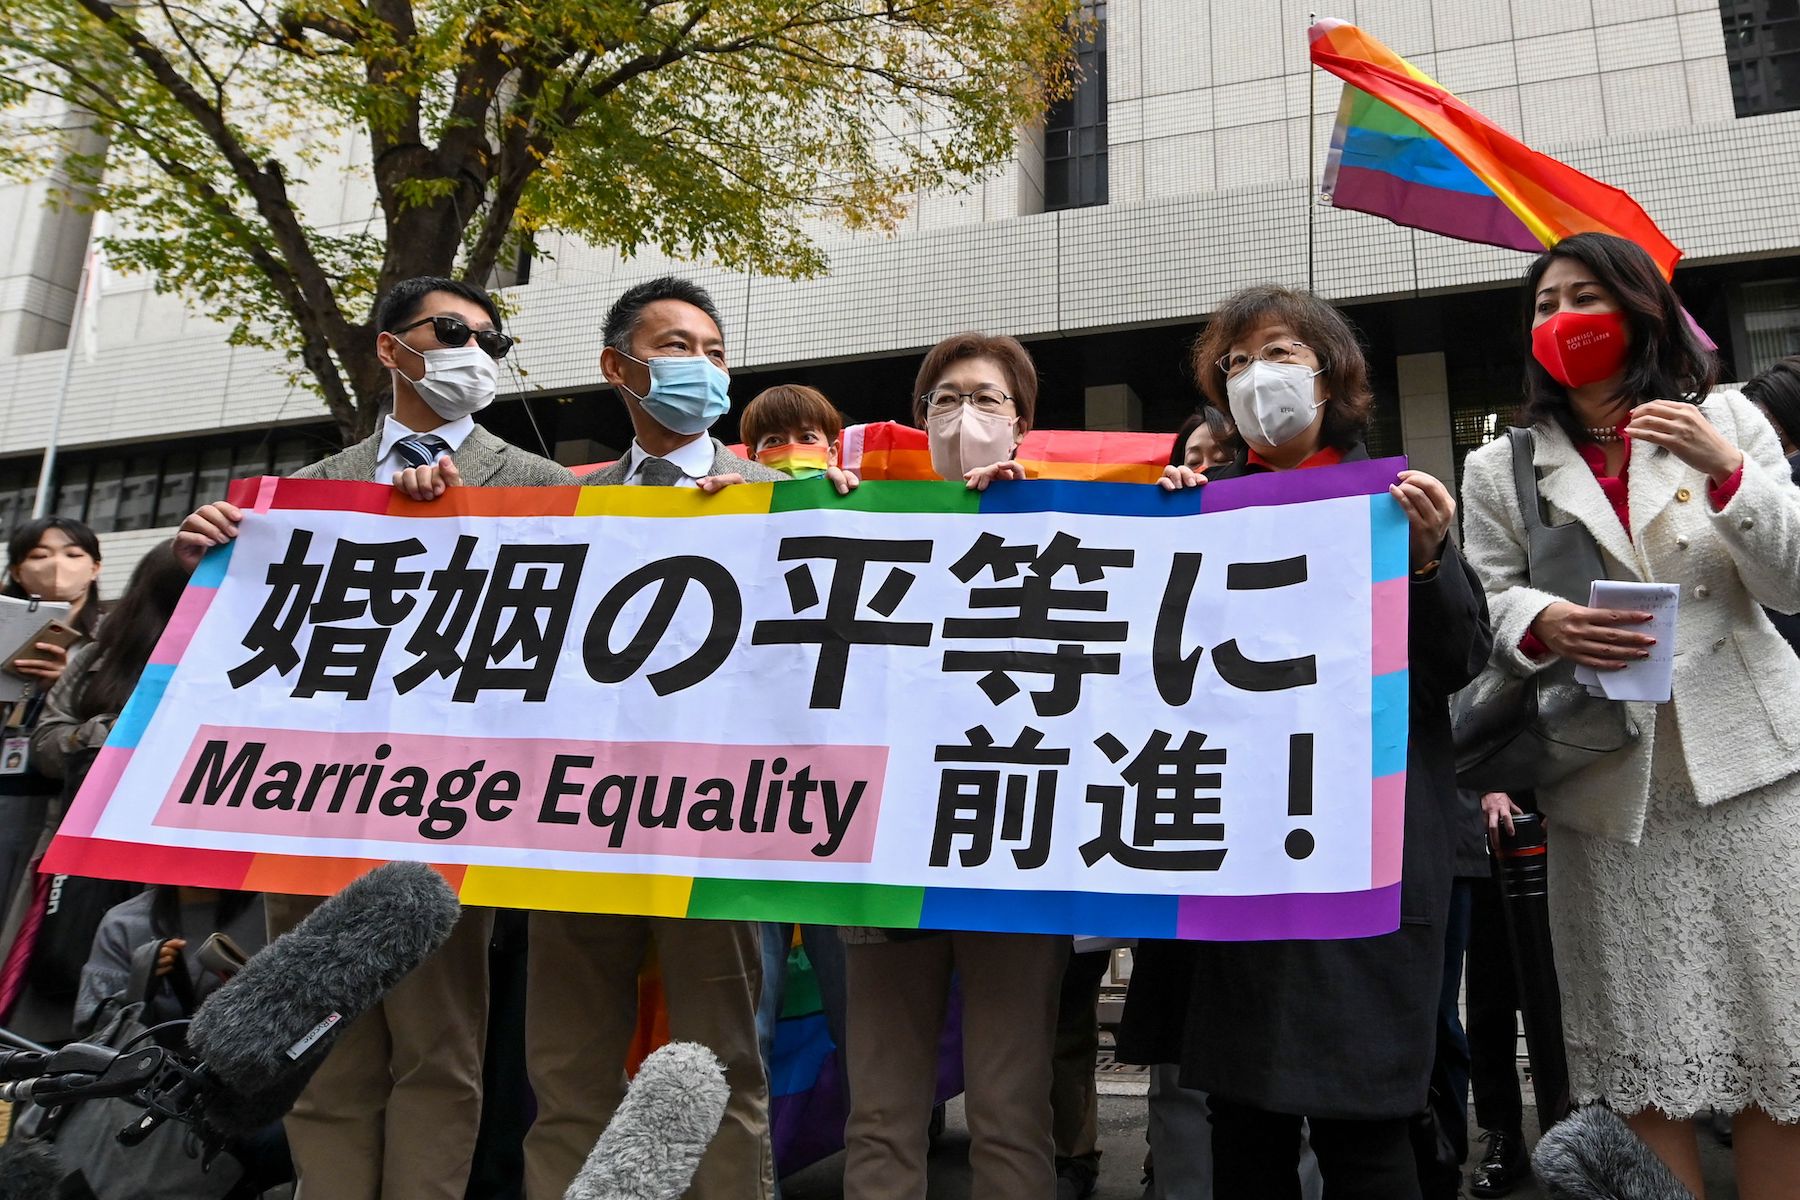 Japan’s ban on same-sex marriage found to be unconstitutional by a high court